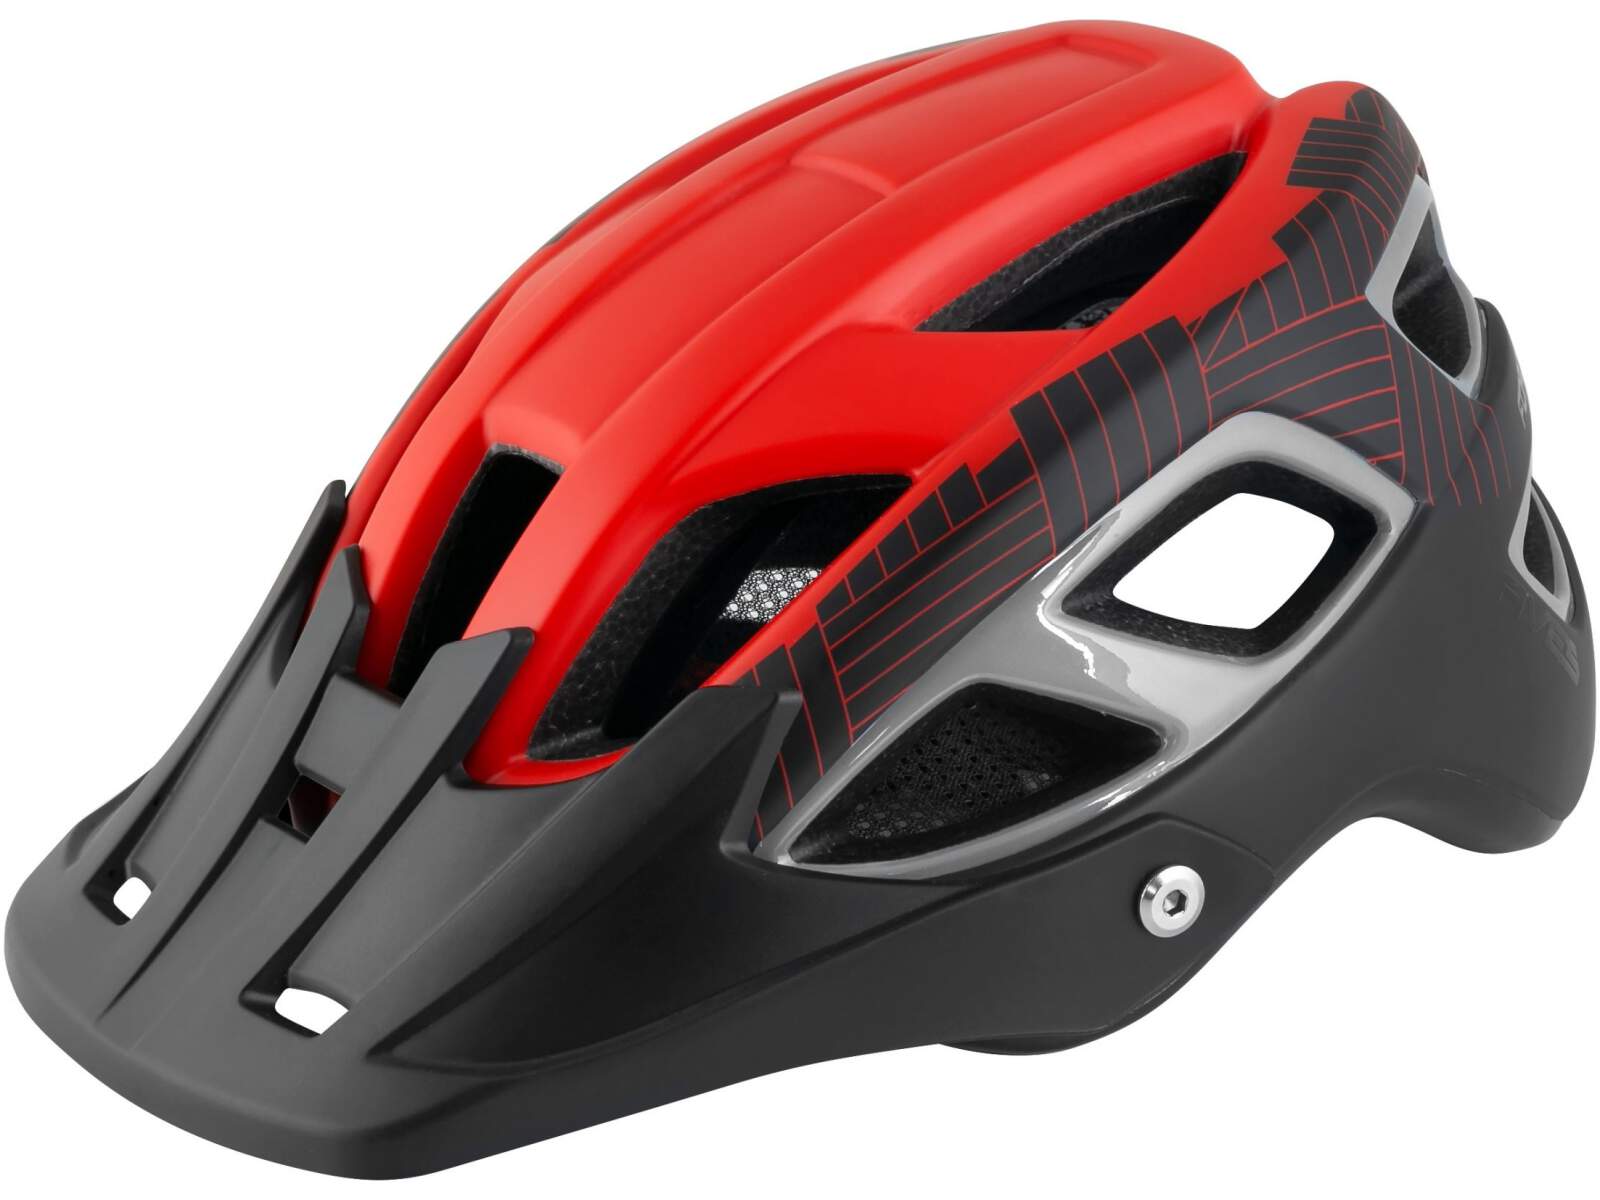 KASK FORCE AVES MTB